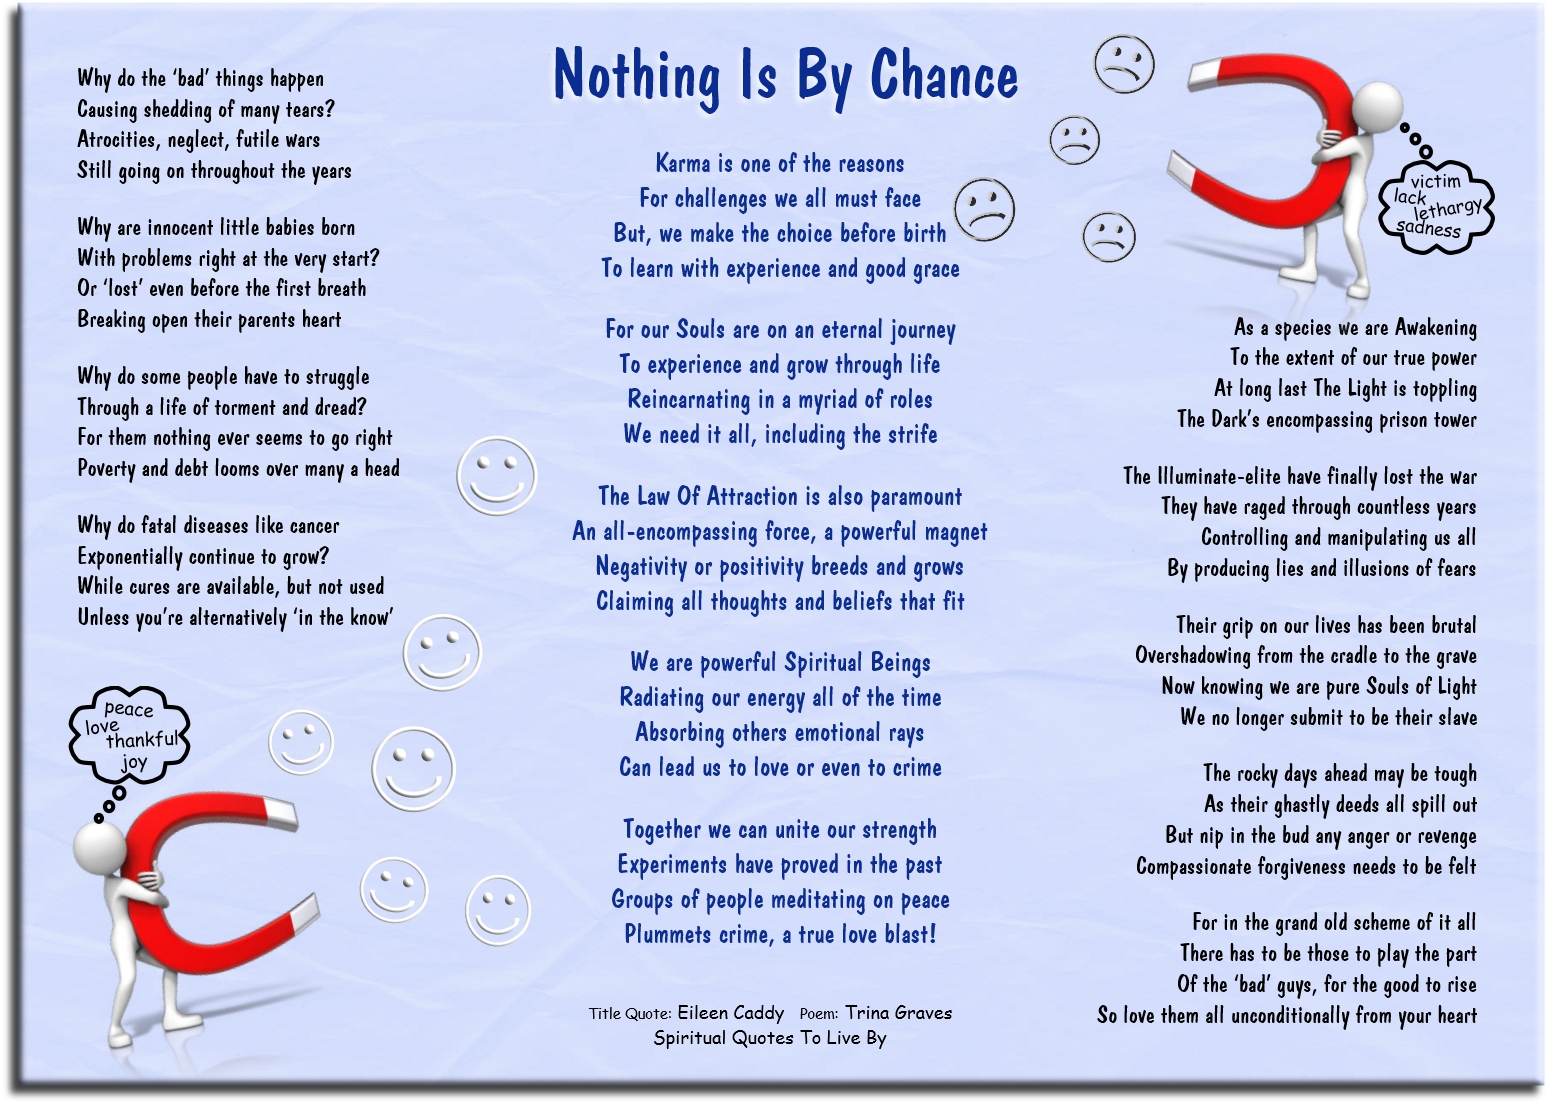 Nothing Is By Chance - inspirational poem by Trina Graves of Spiritual Quotes To Live By